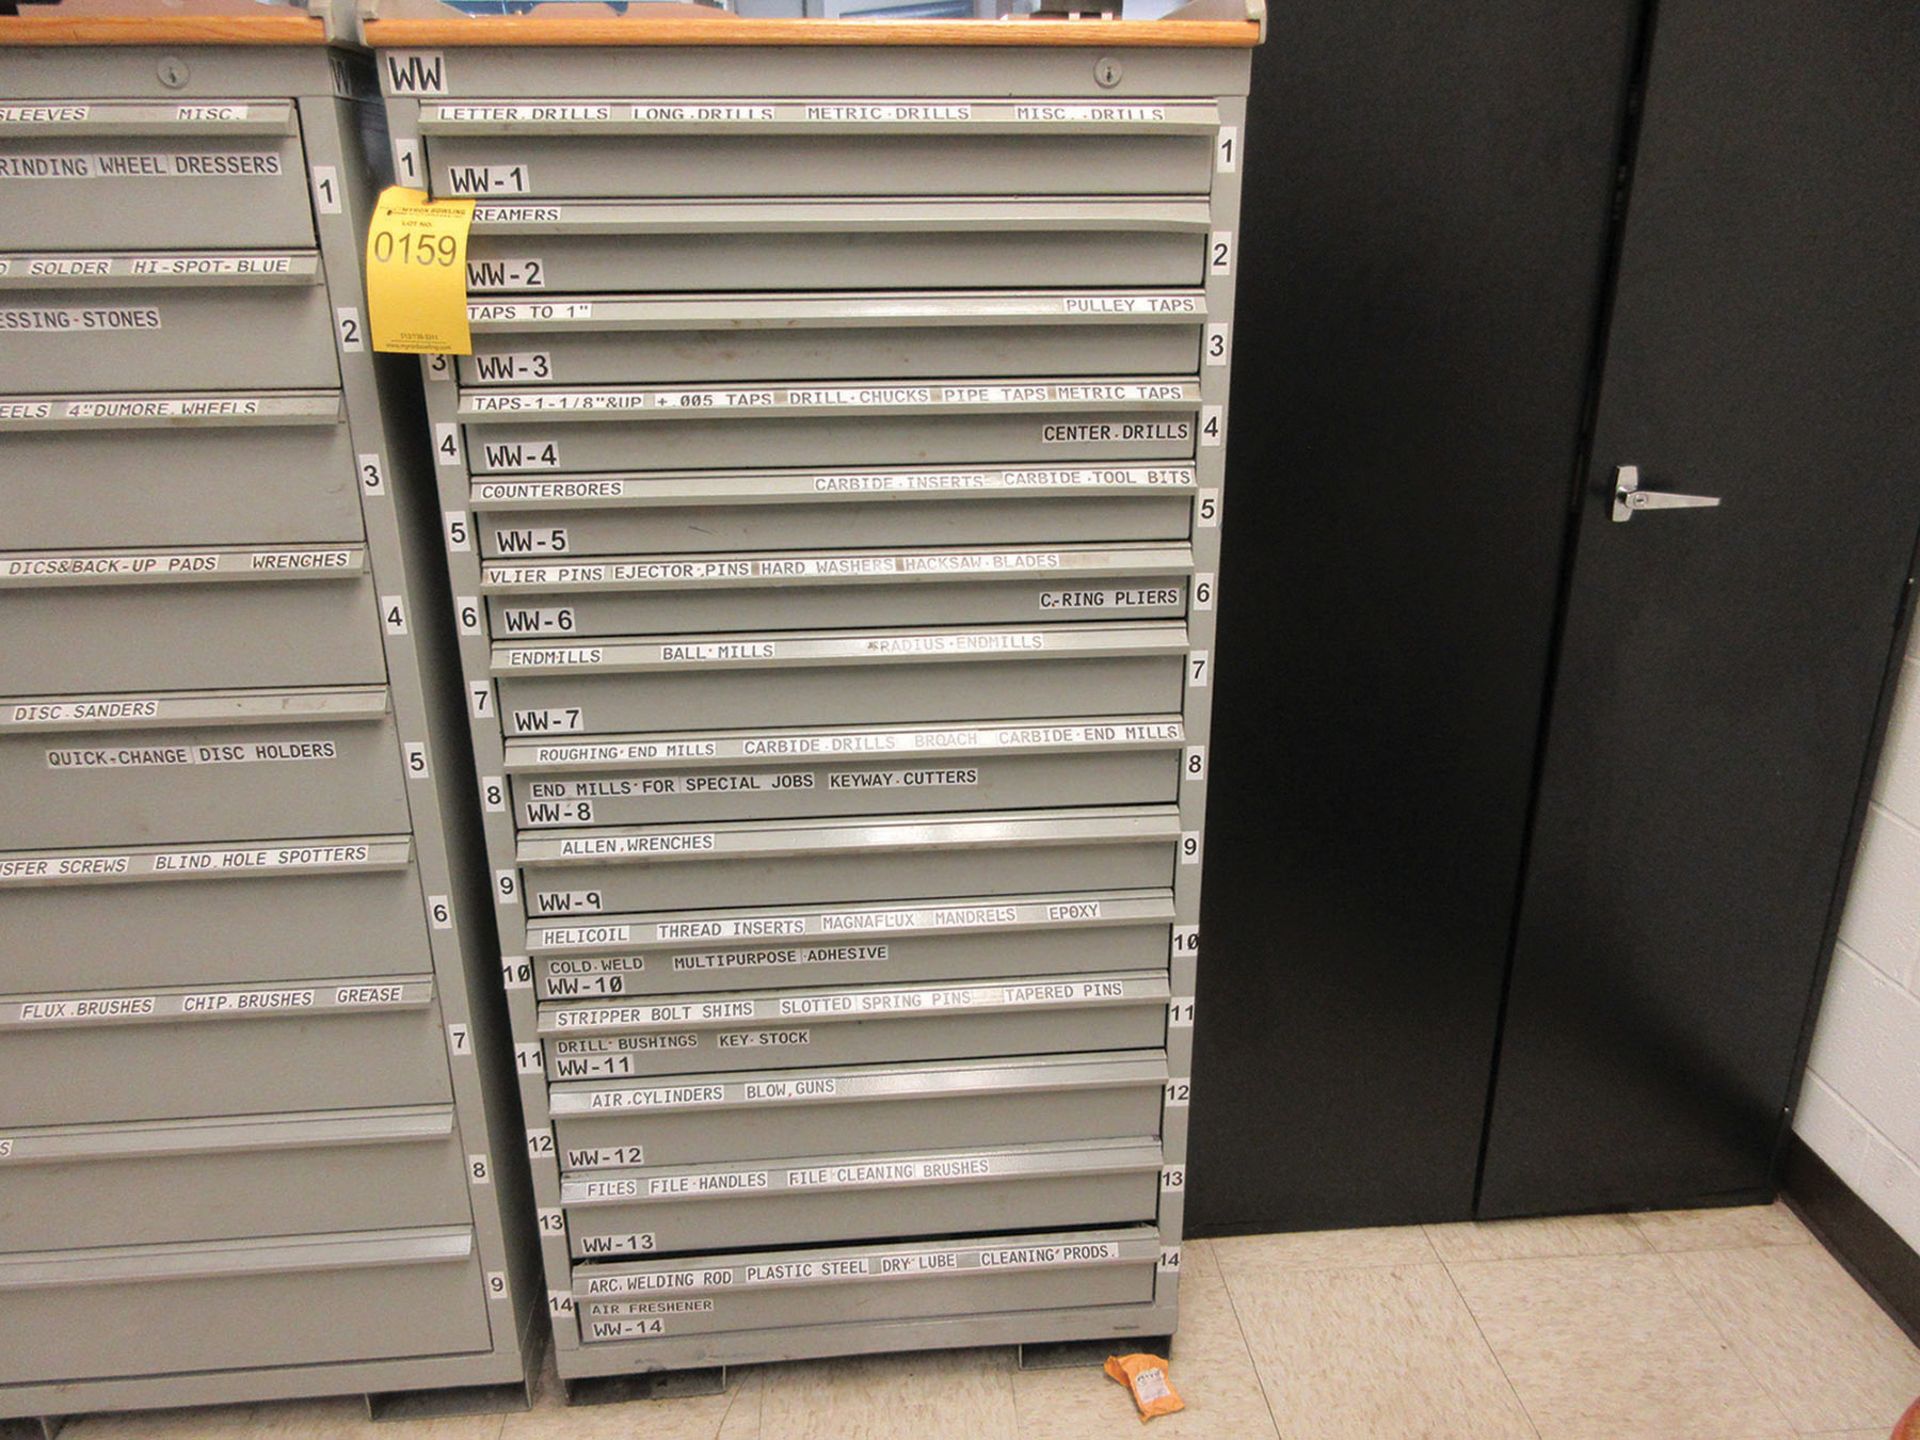 9-DRAWER CABINET WITH HELICOILS, MANDRELS, EJECTOR PINS, AND WASHERS